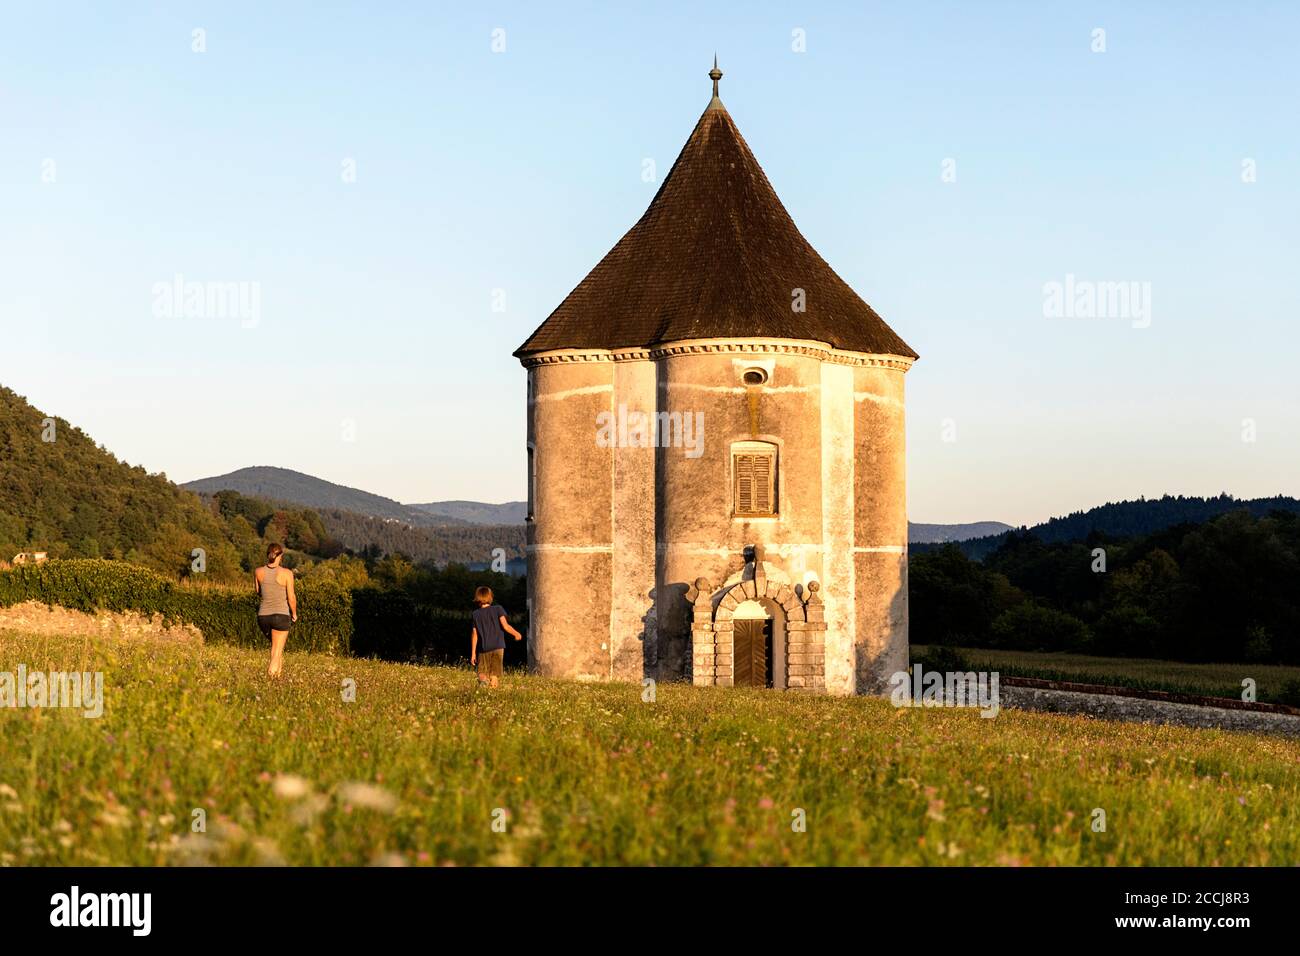 Mother and son walking to the Devil's tower in Soteska at sunset, Slovenia Stock Photo